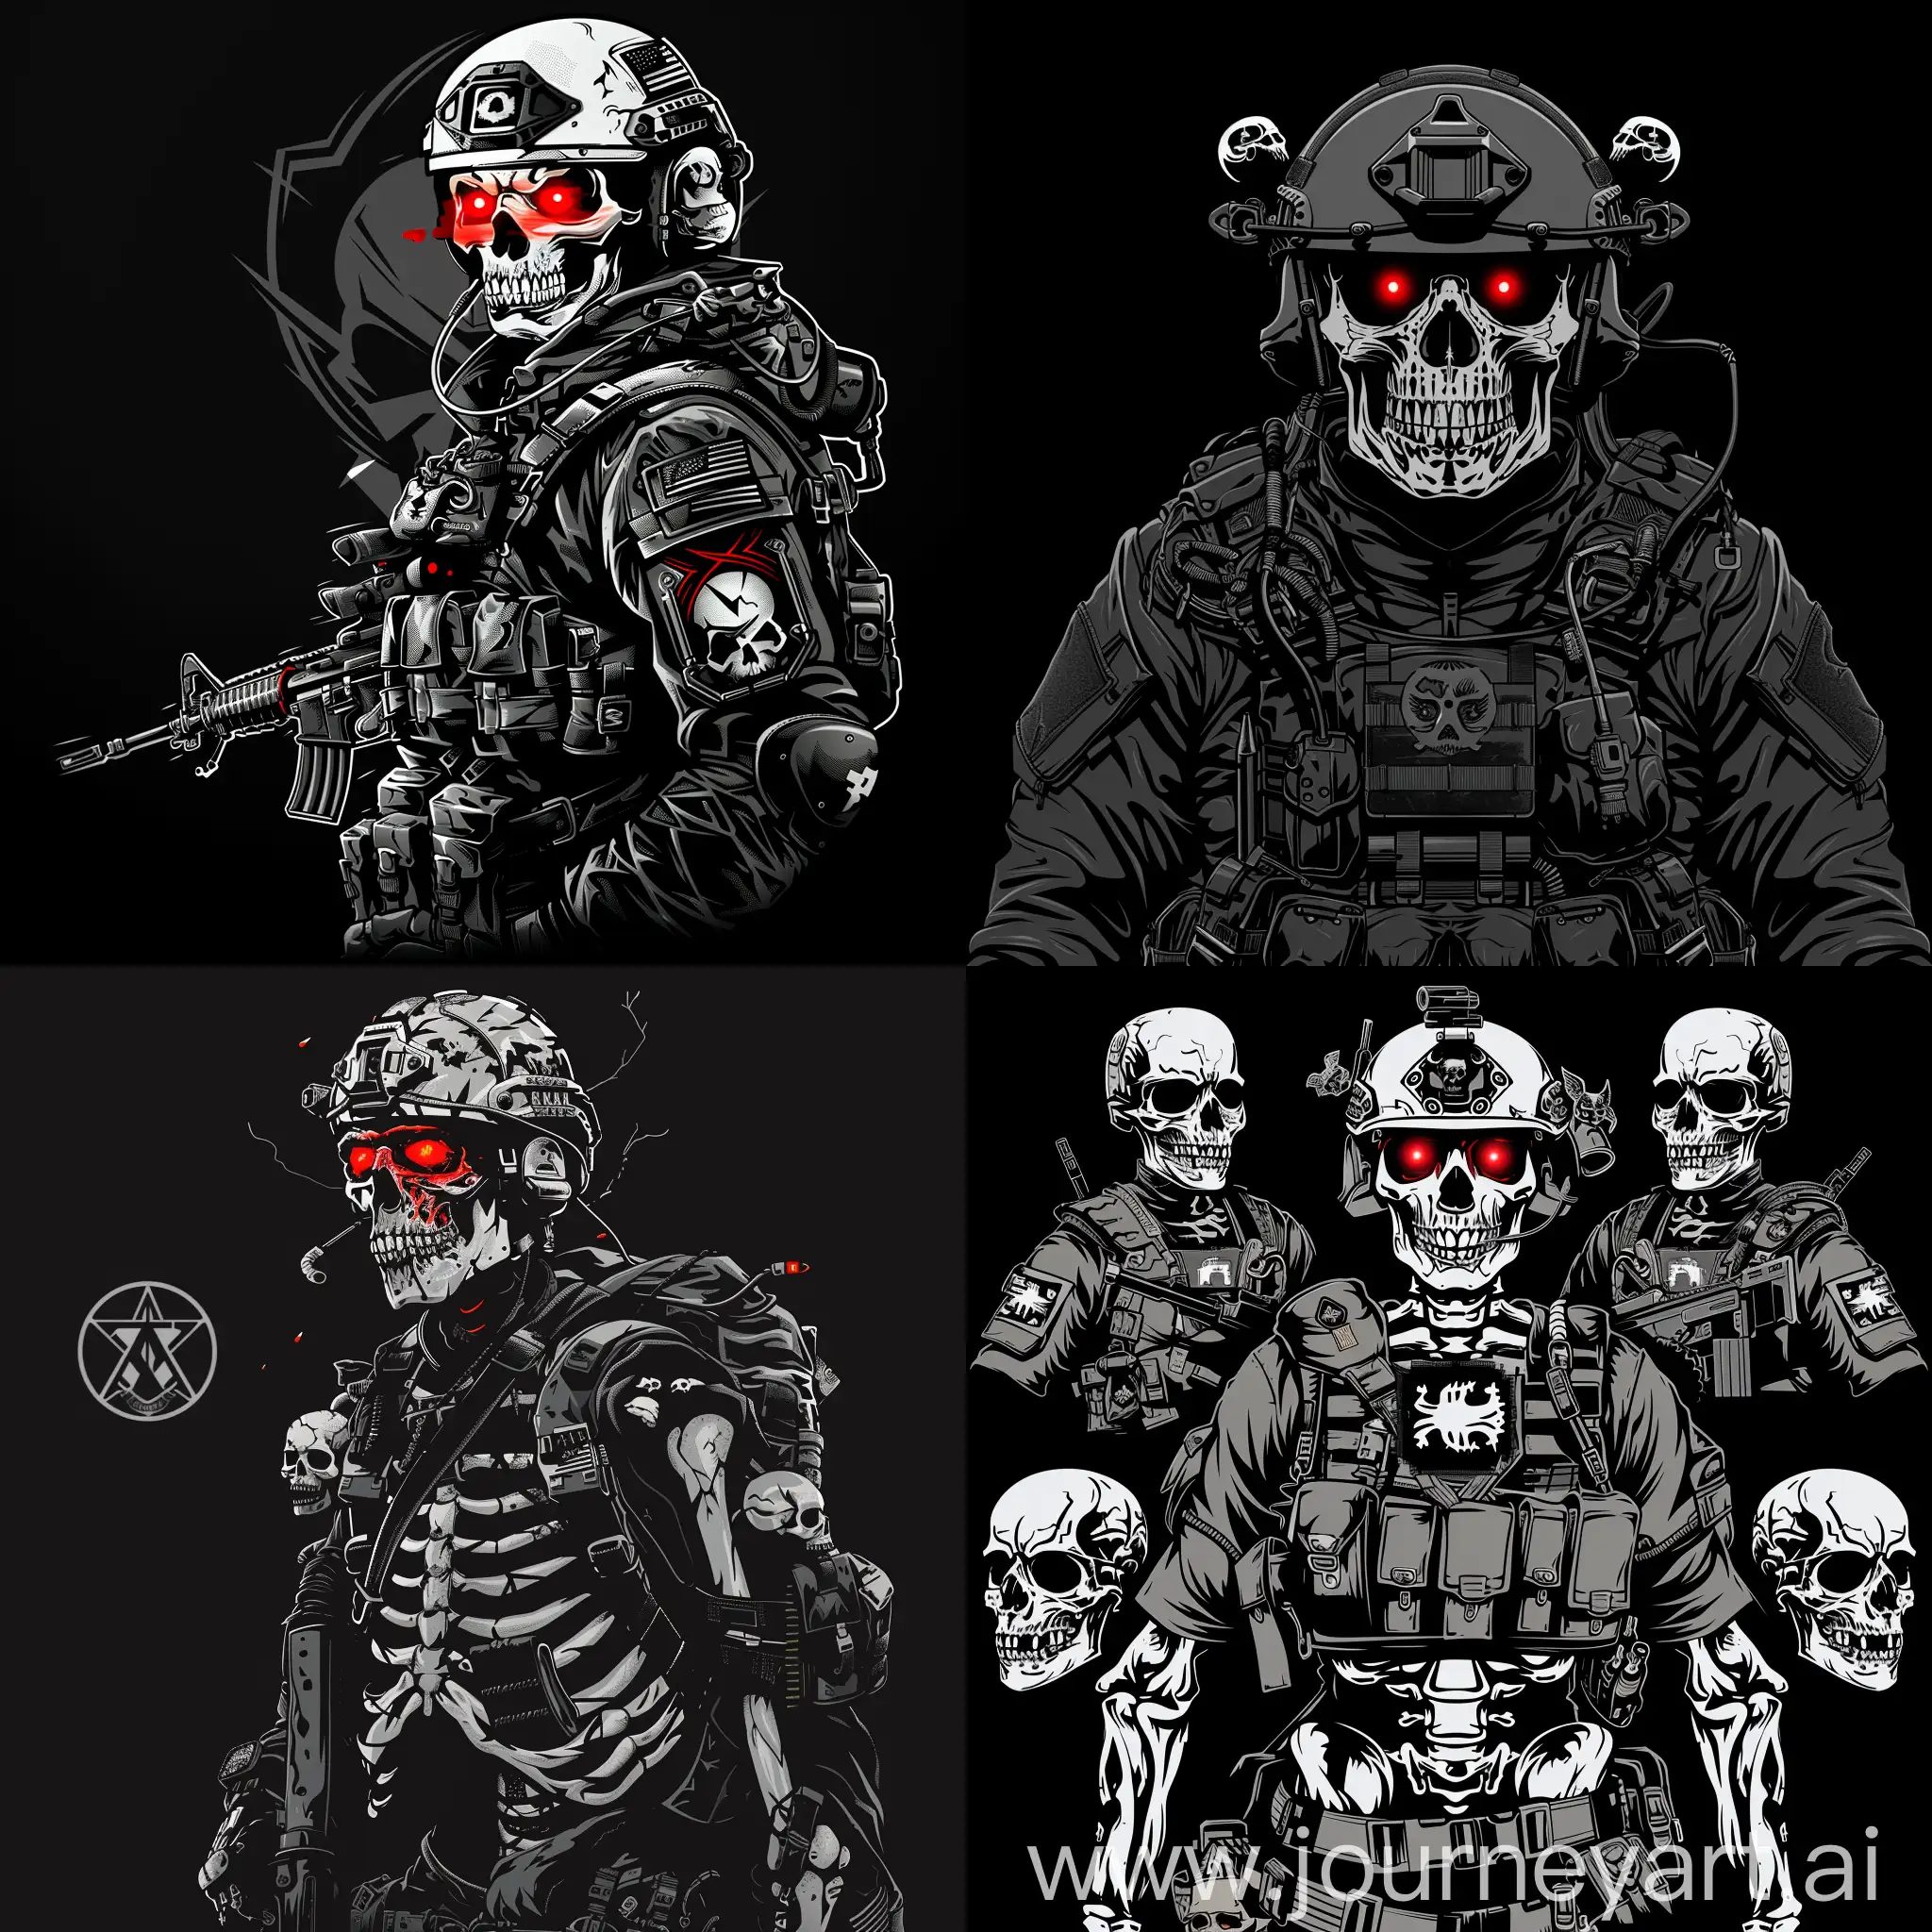 Modern-Military-Undead-Soldiers-with-Glowing-Red-Eyes-on-Black-Background